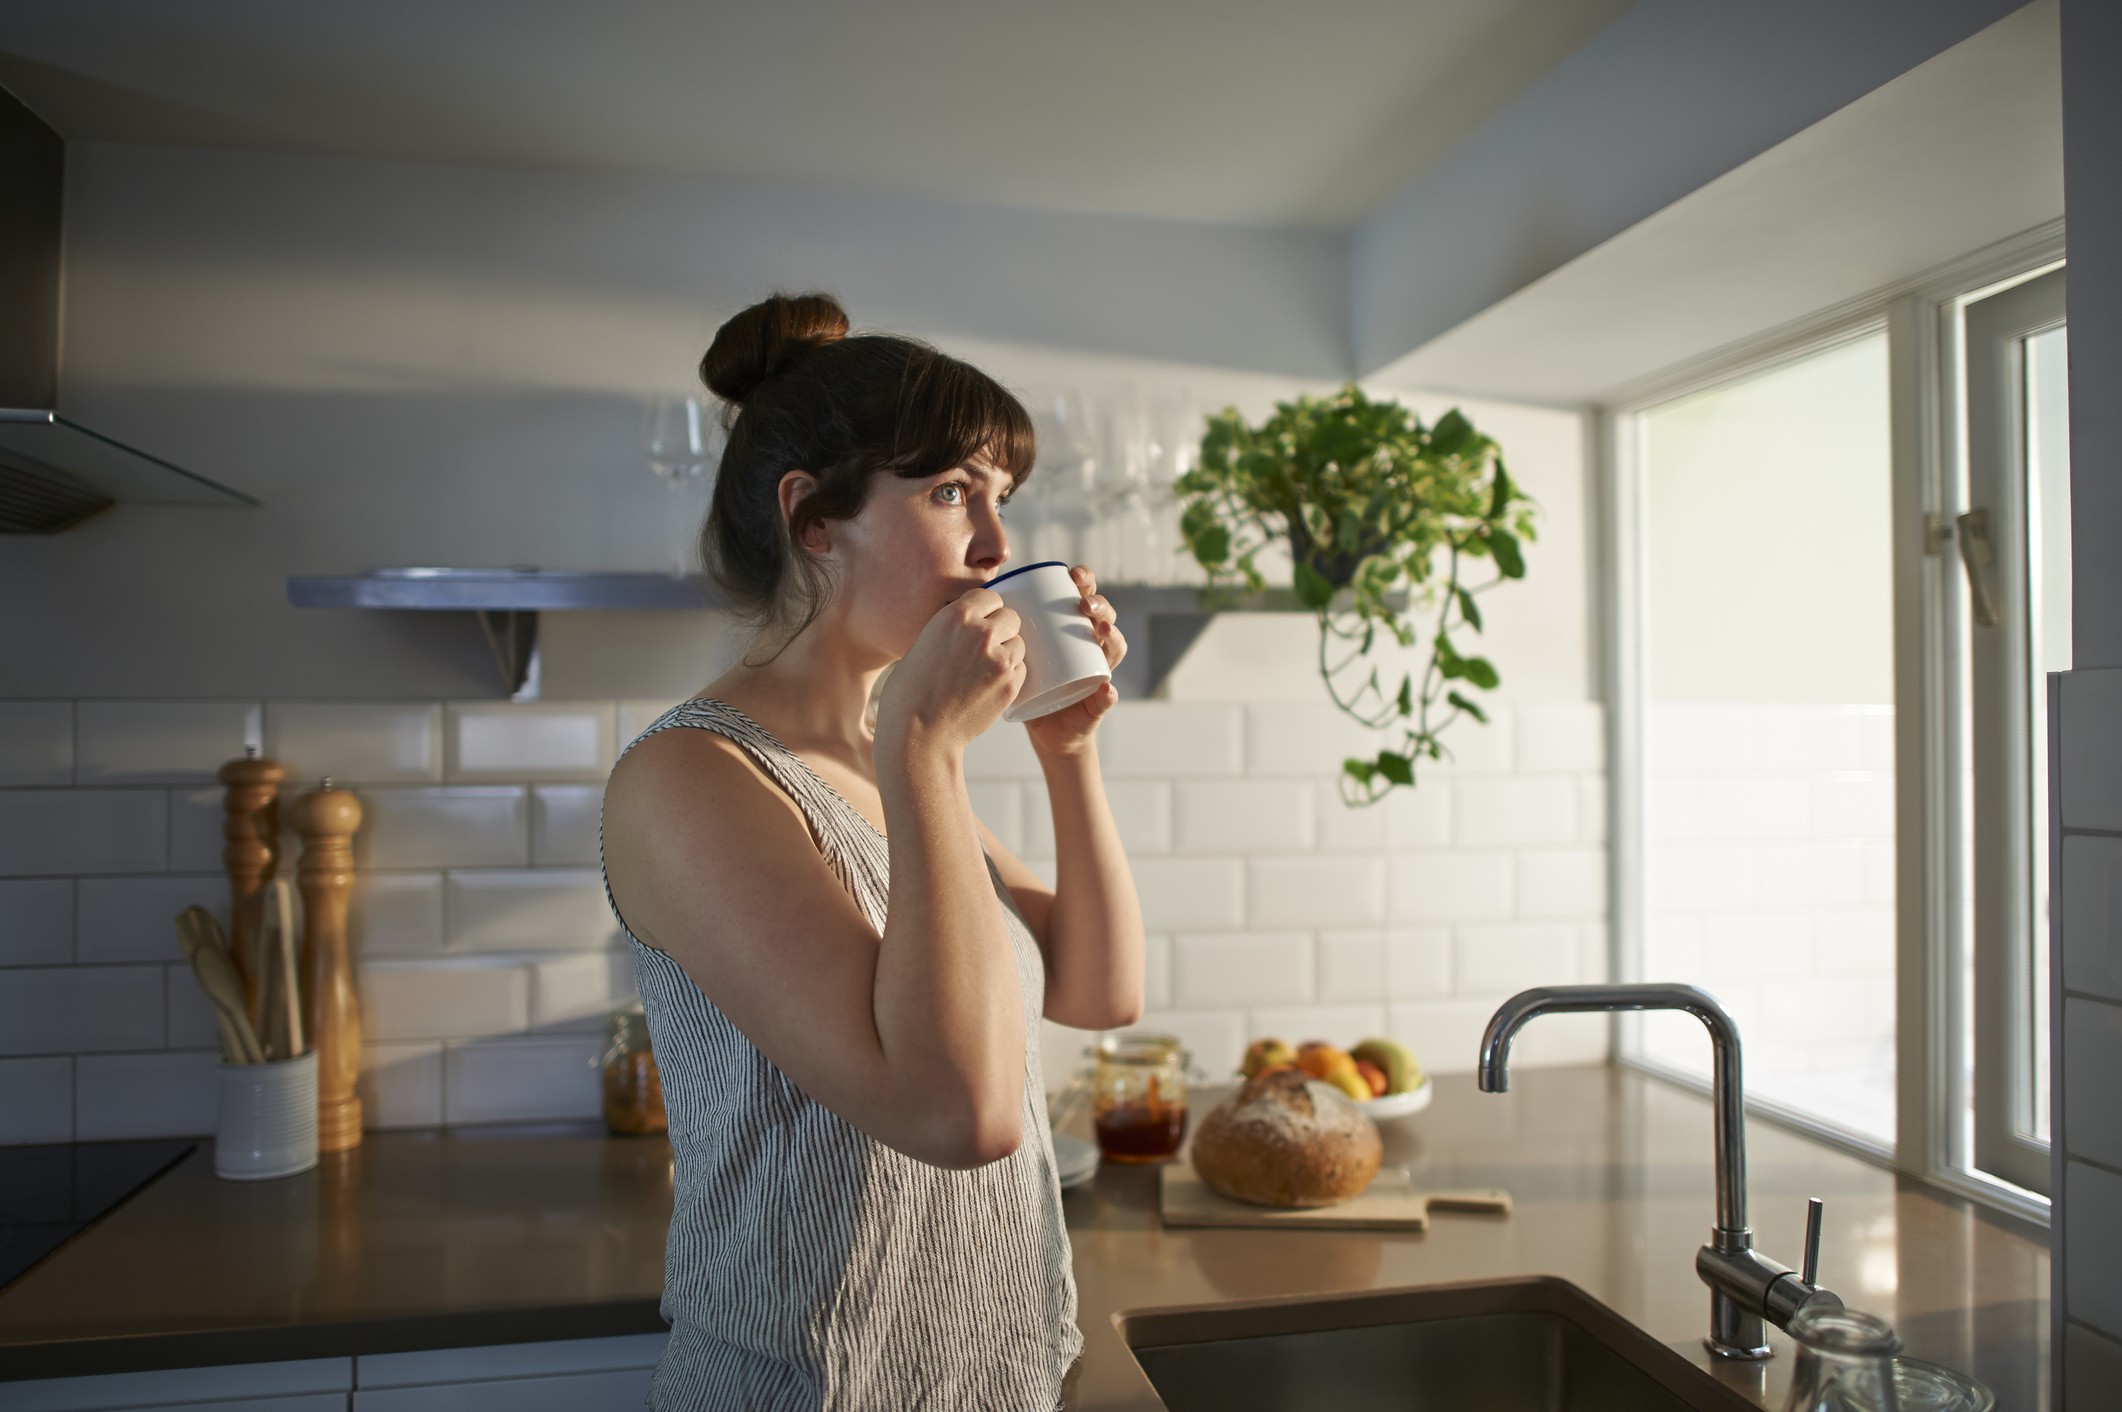 A woman standing in her kitchen drinks from a mug. (Foto: Getty Images)